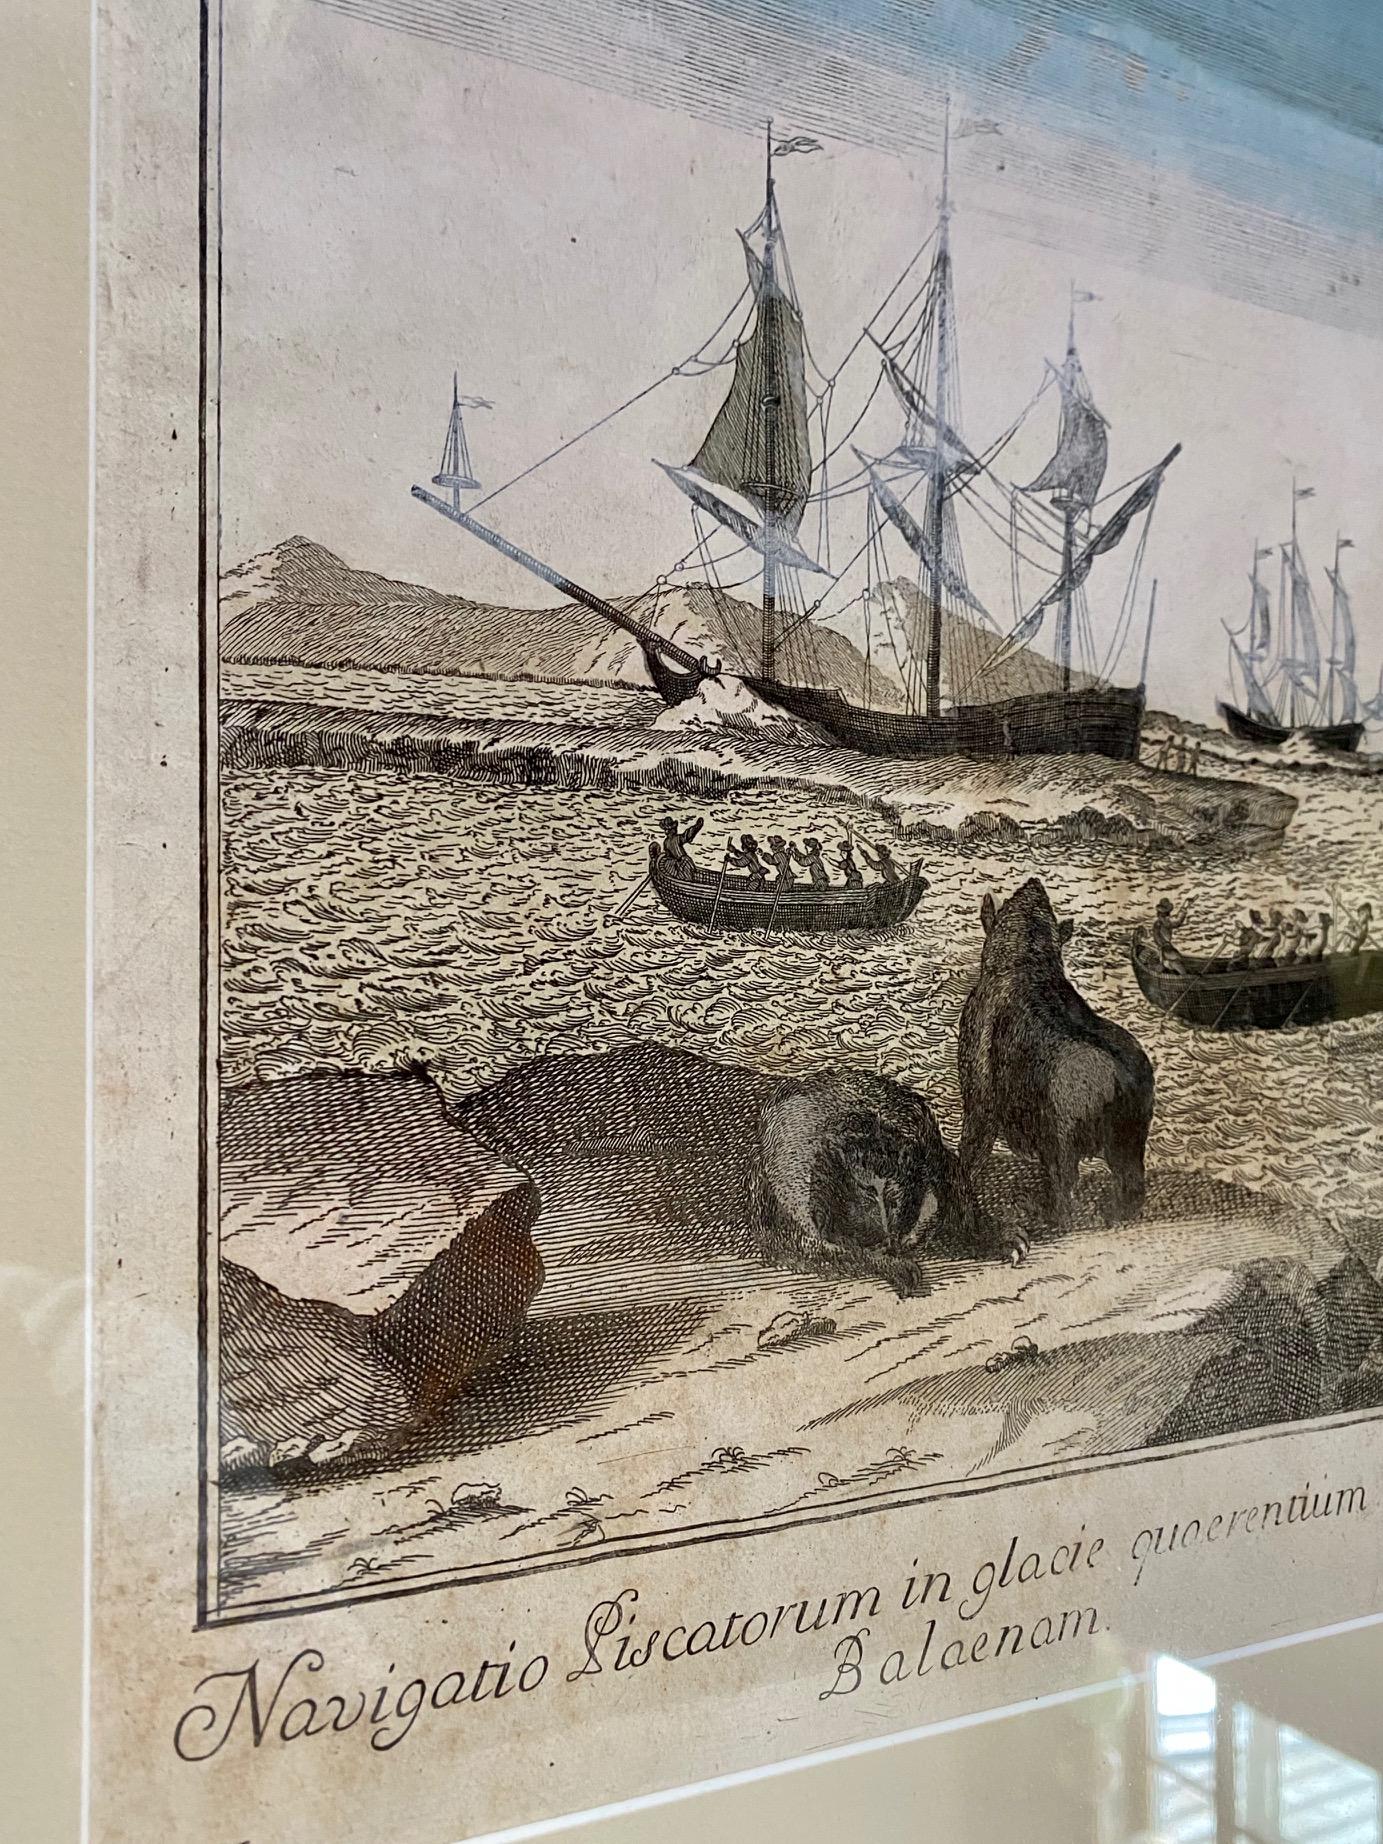 Very early 18th century Dutch woodblock engraving of the Northern Whale Fishery, circa 1720, a hand colored engraving illustrating the Dutch whaling fleet in a northern embayment with many boats lowered, a large right whale in the center and the